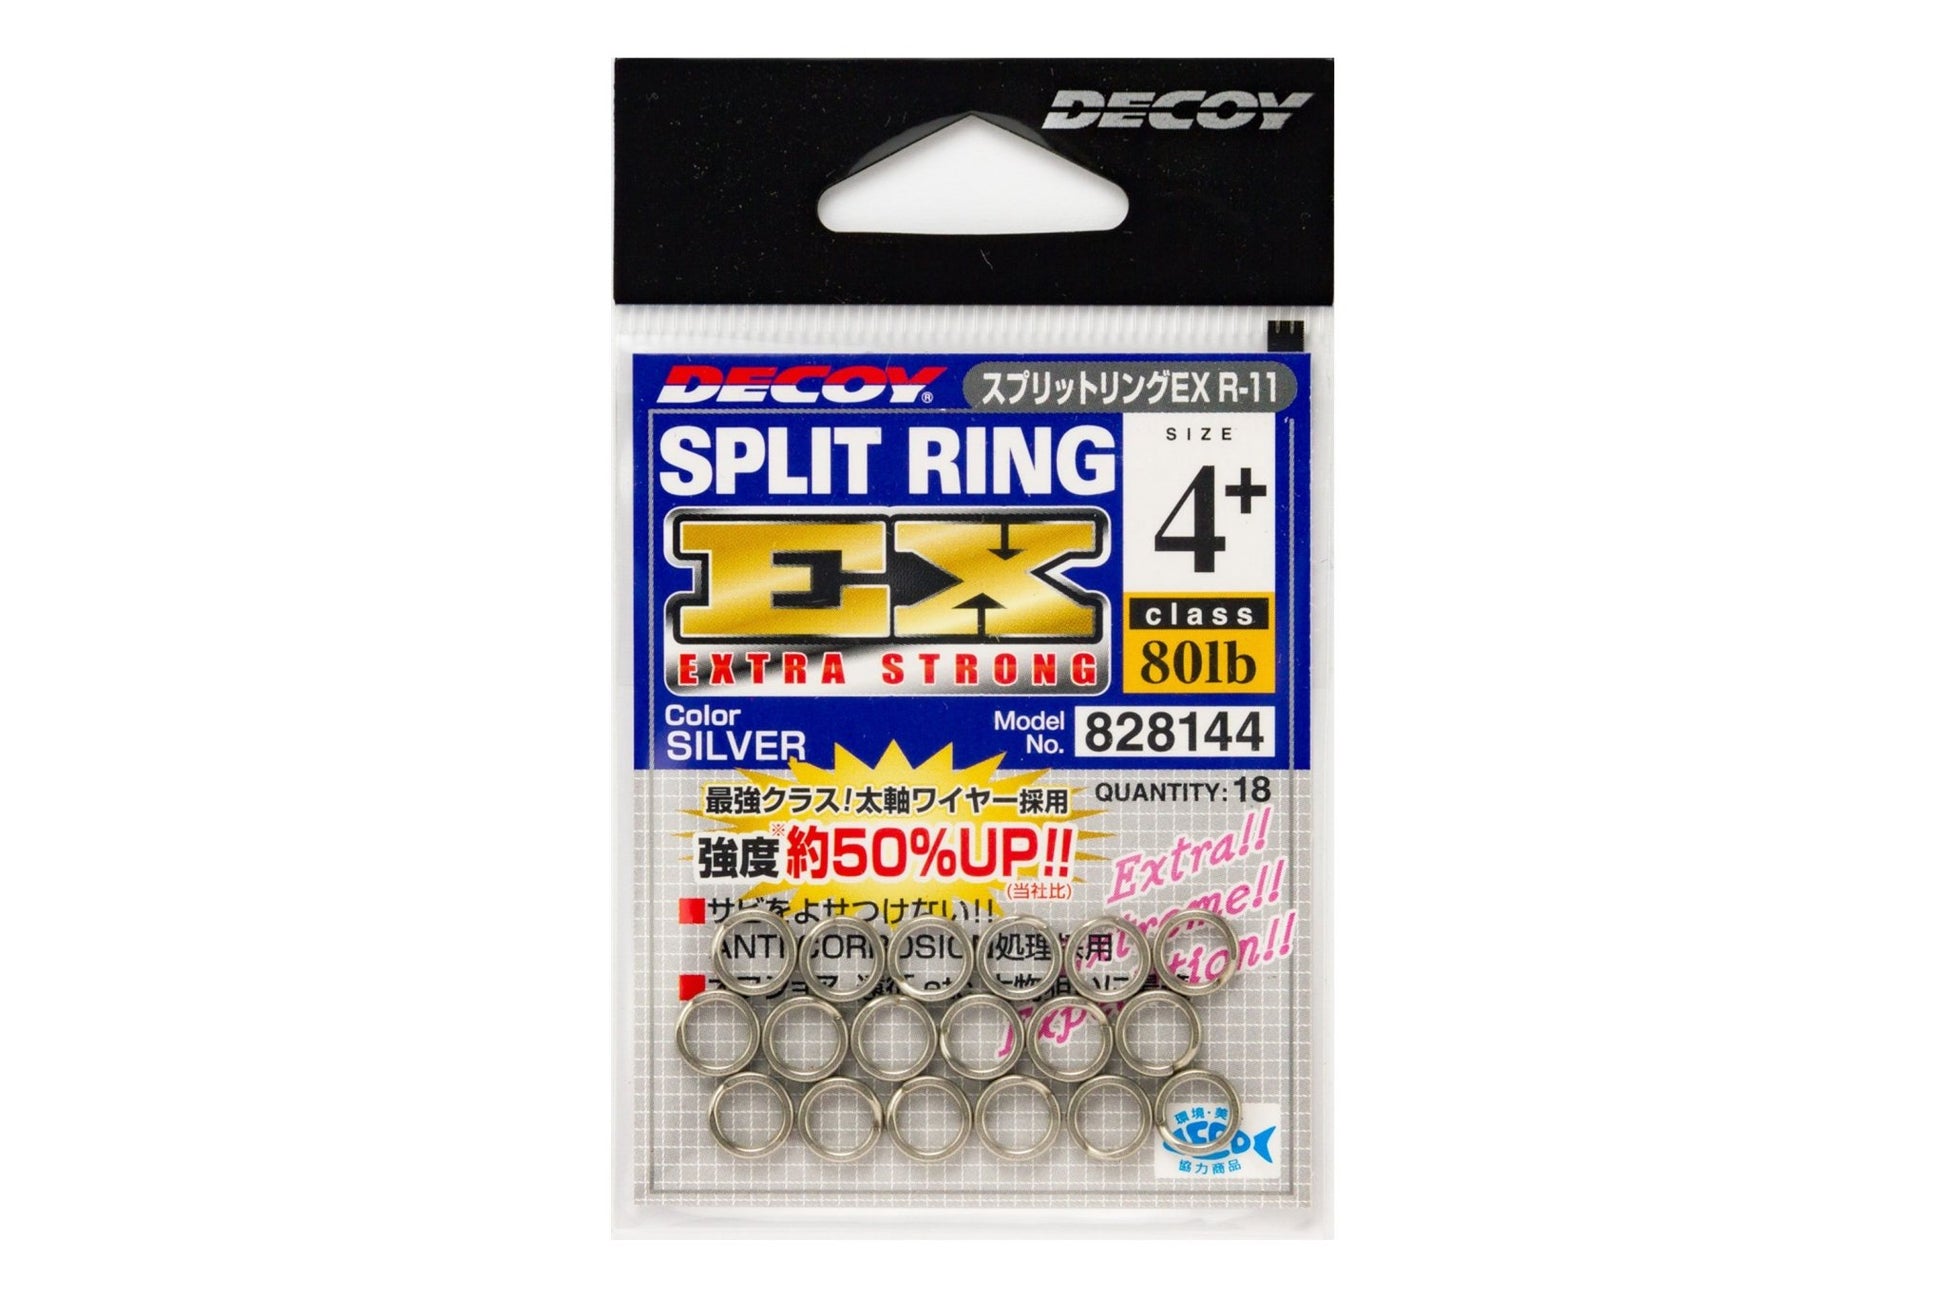 Split Ring - Decoy - EX Extra Strong R-11 - The Fishermans Hut